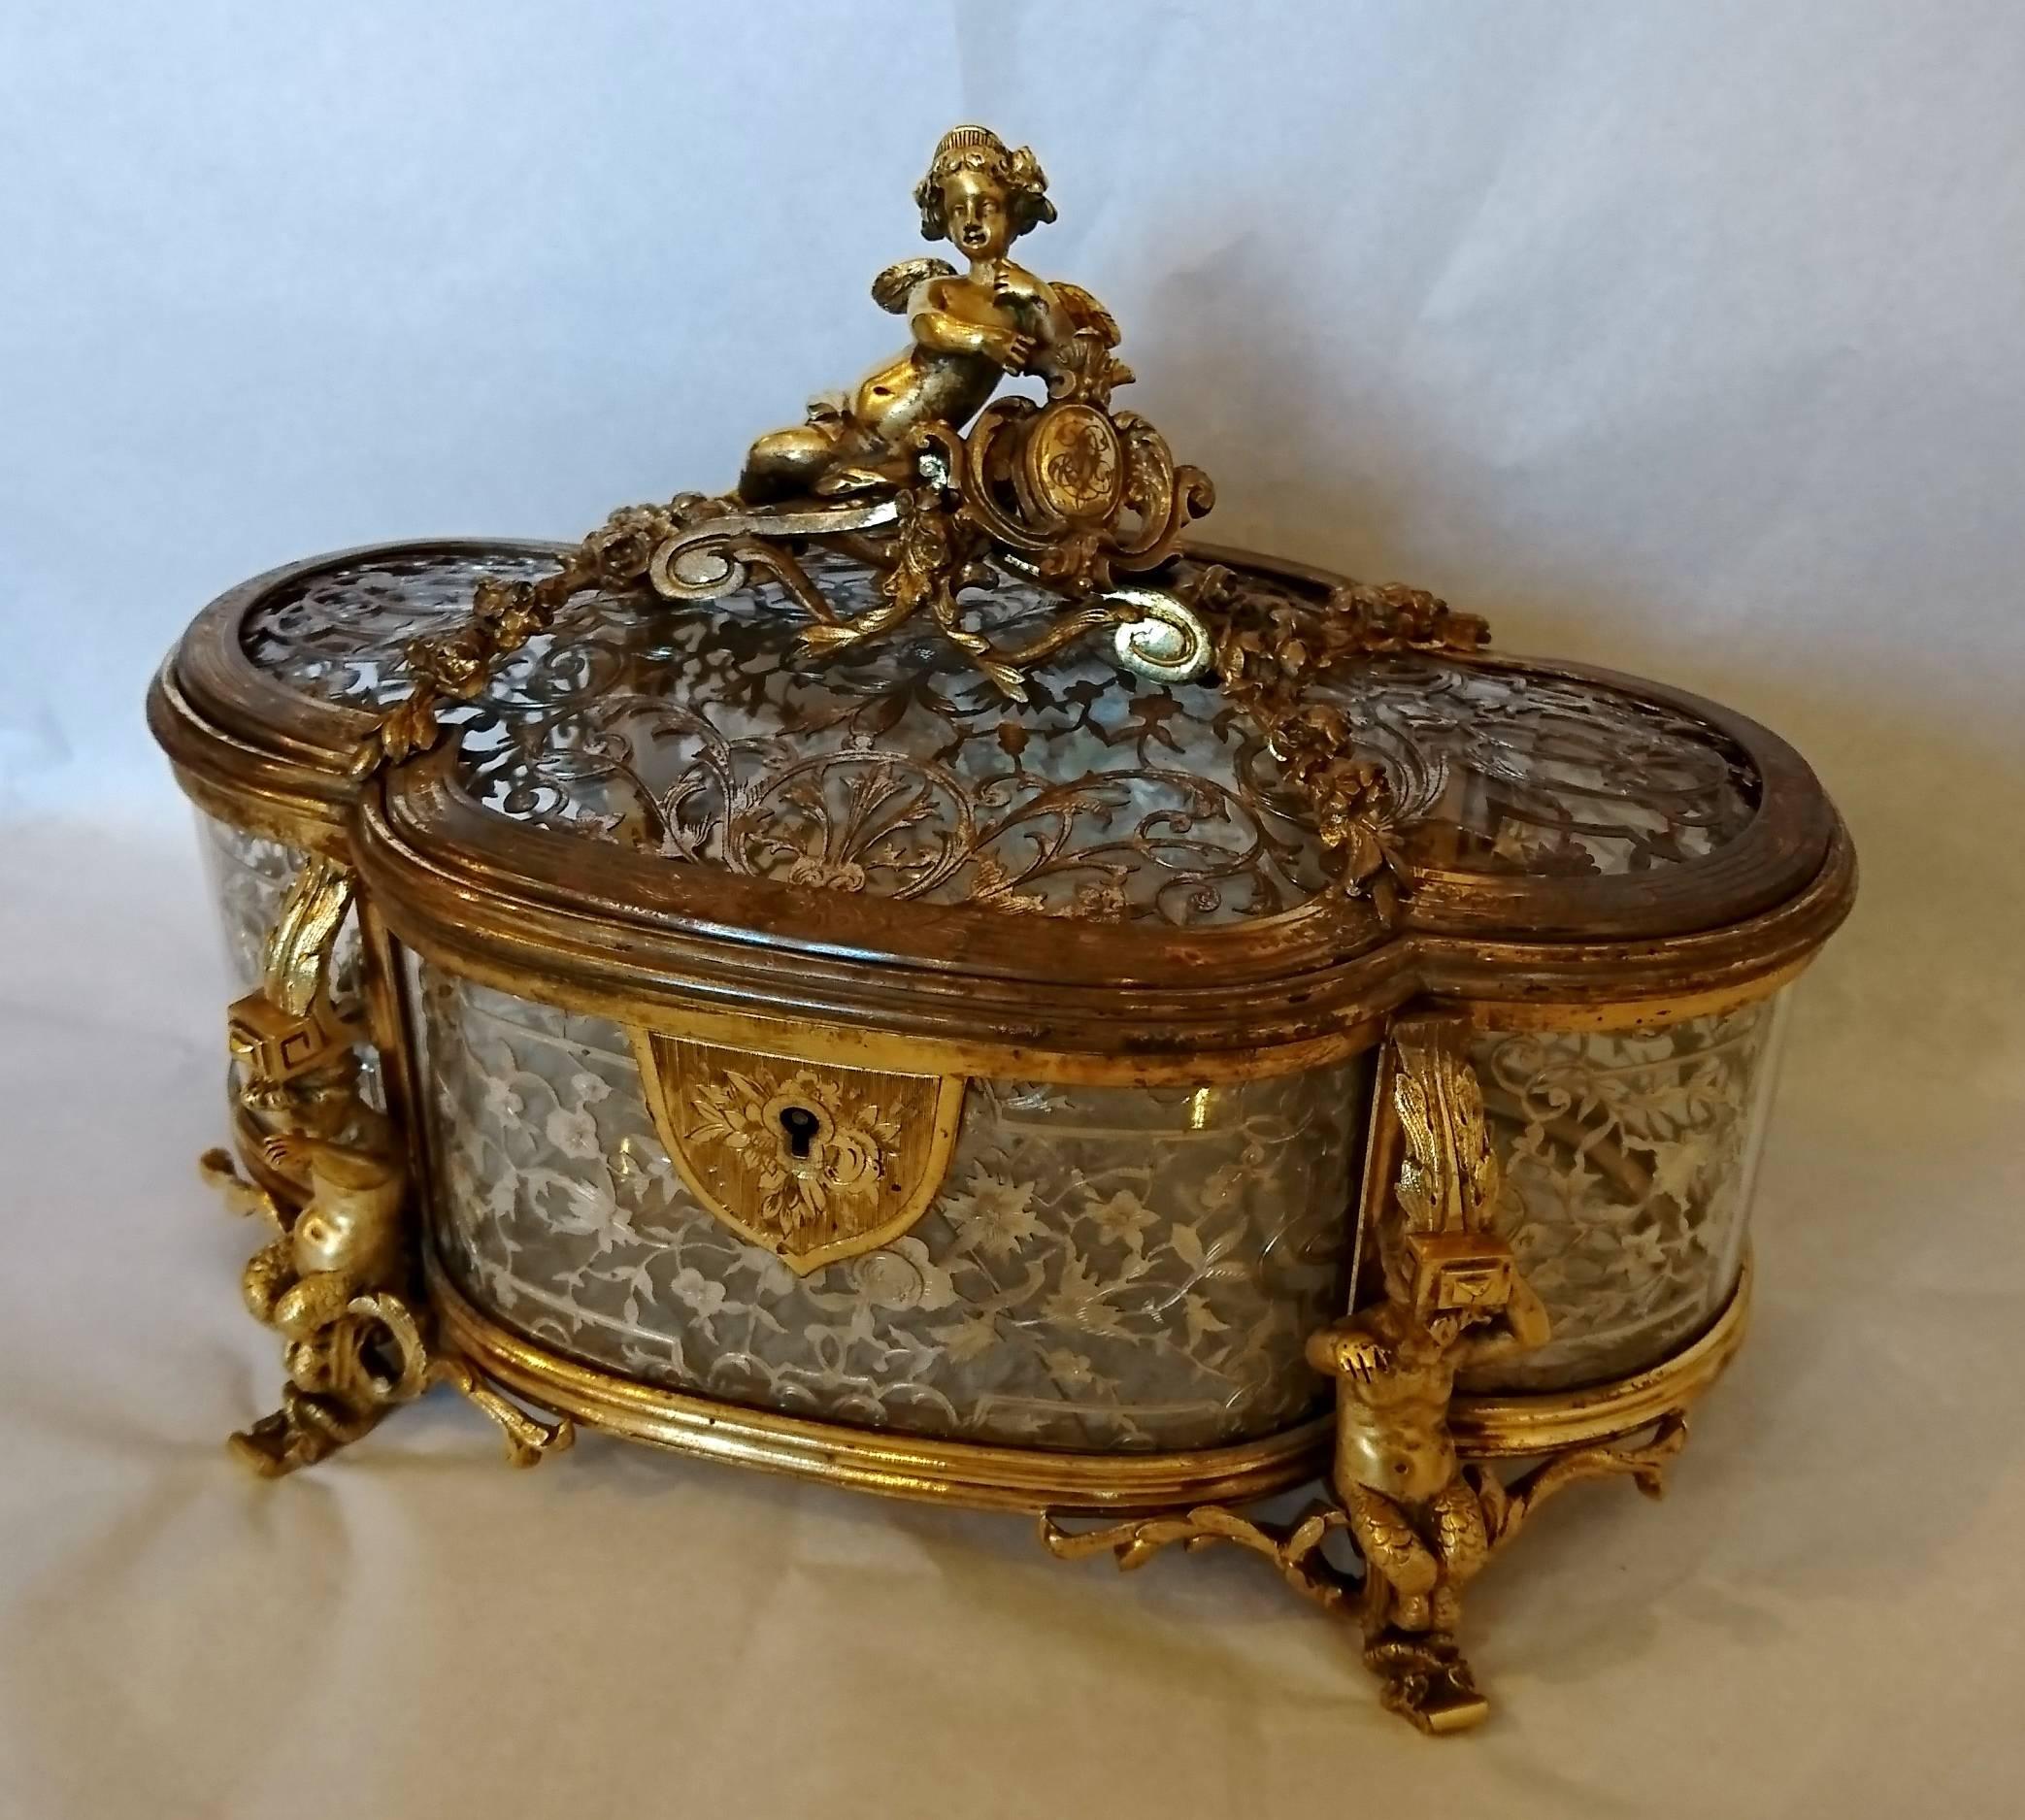 An unusual gilt bronze and silver filigree jewelry casket, with decoration of putti and flowers, signed Alphonse Giroux and Cie, Paris, circa 1865.
Some rubbing to the gold, one glass cracked inside.
 